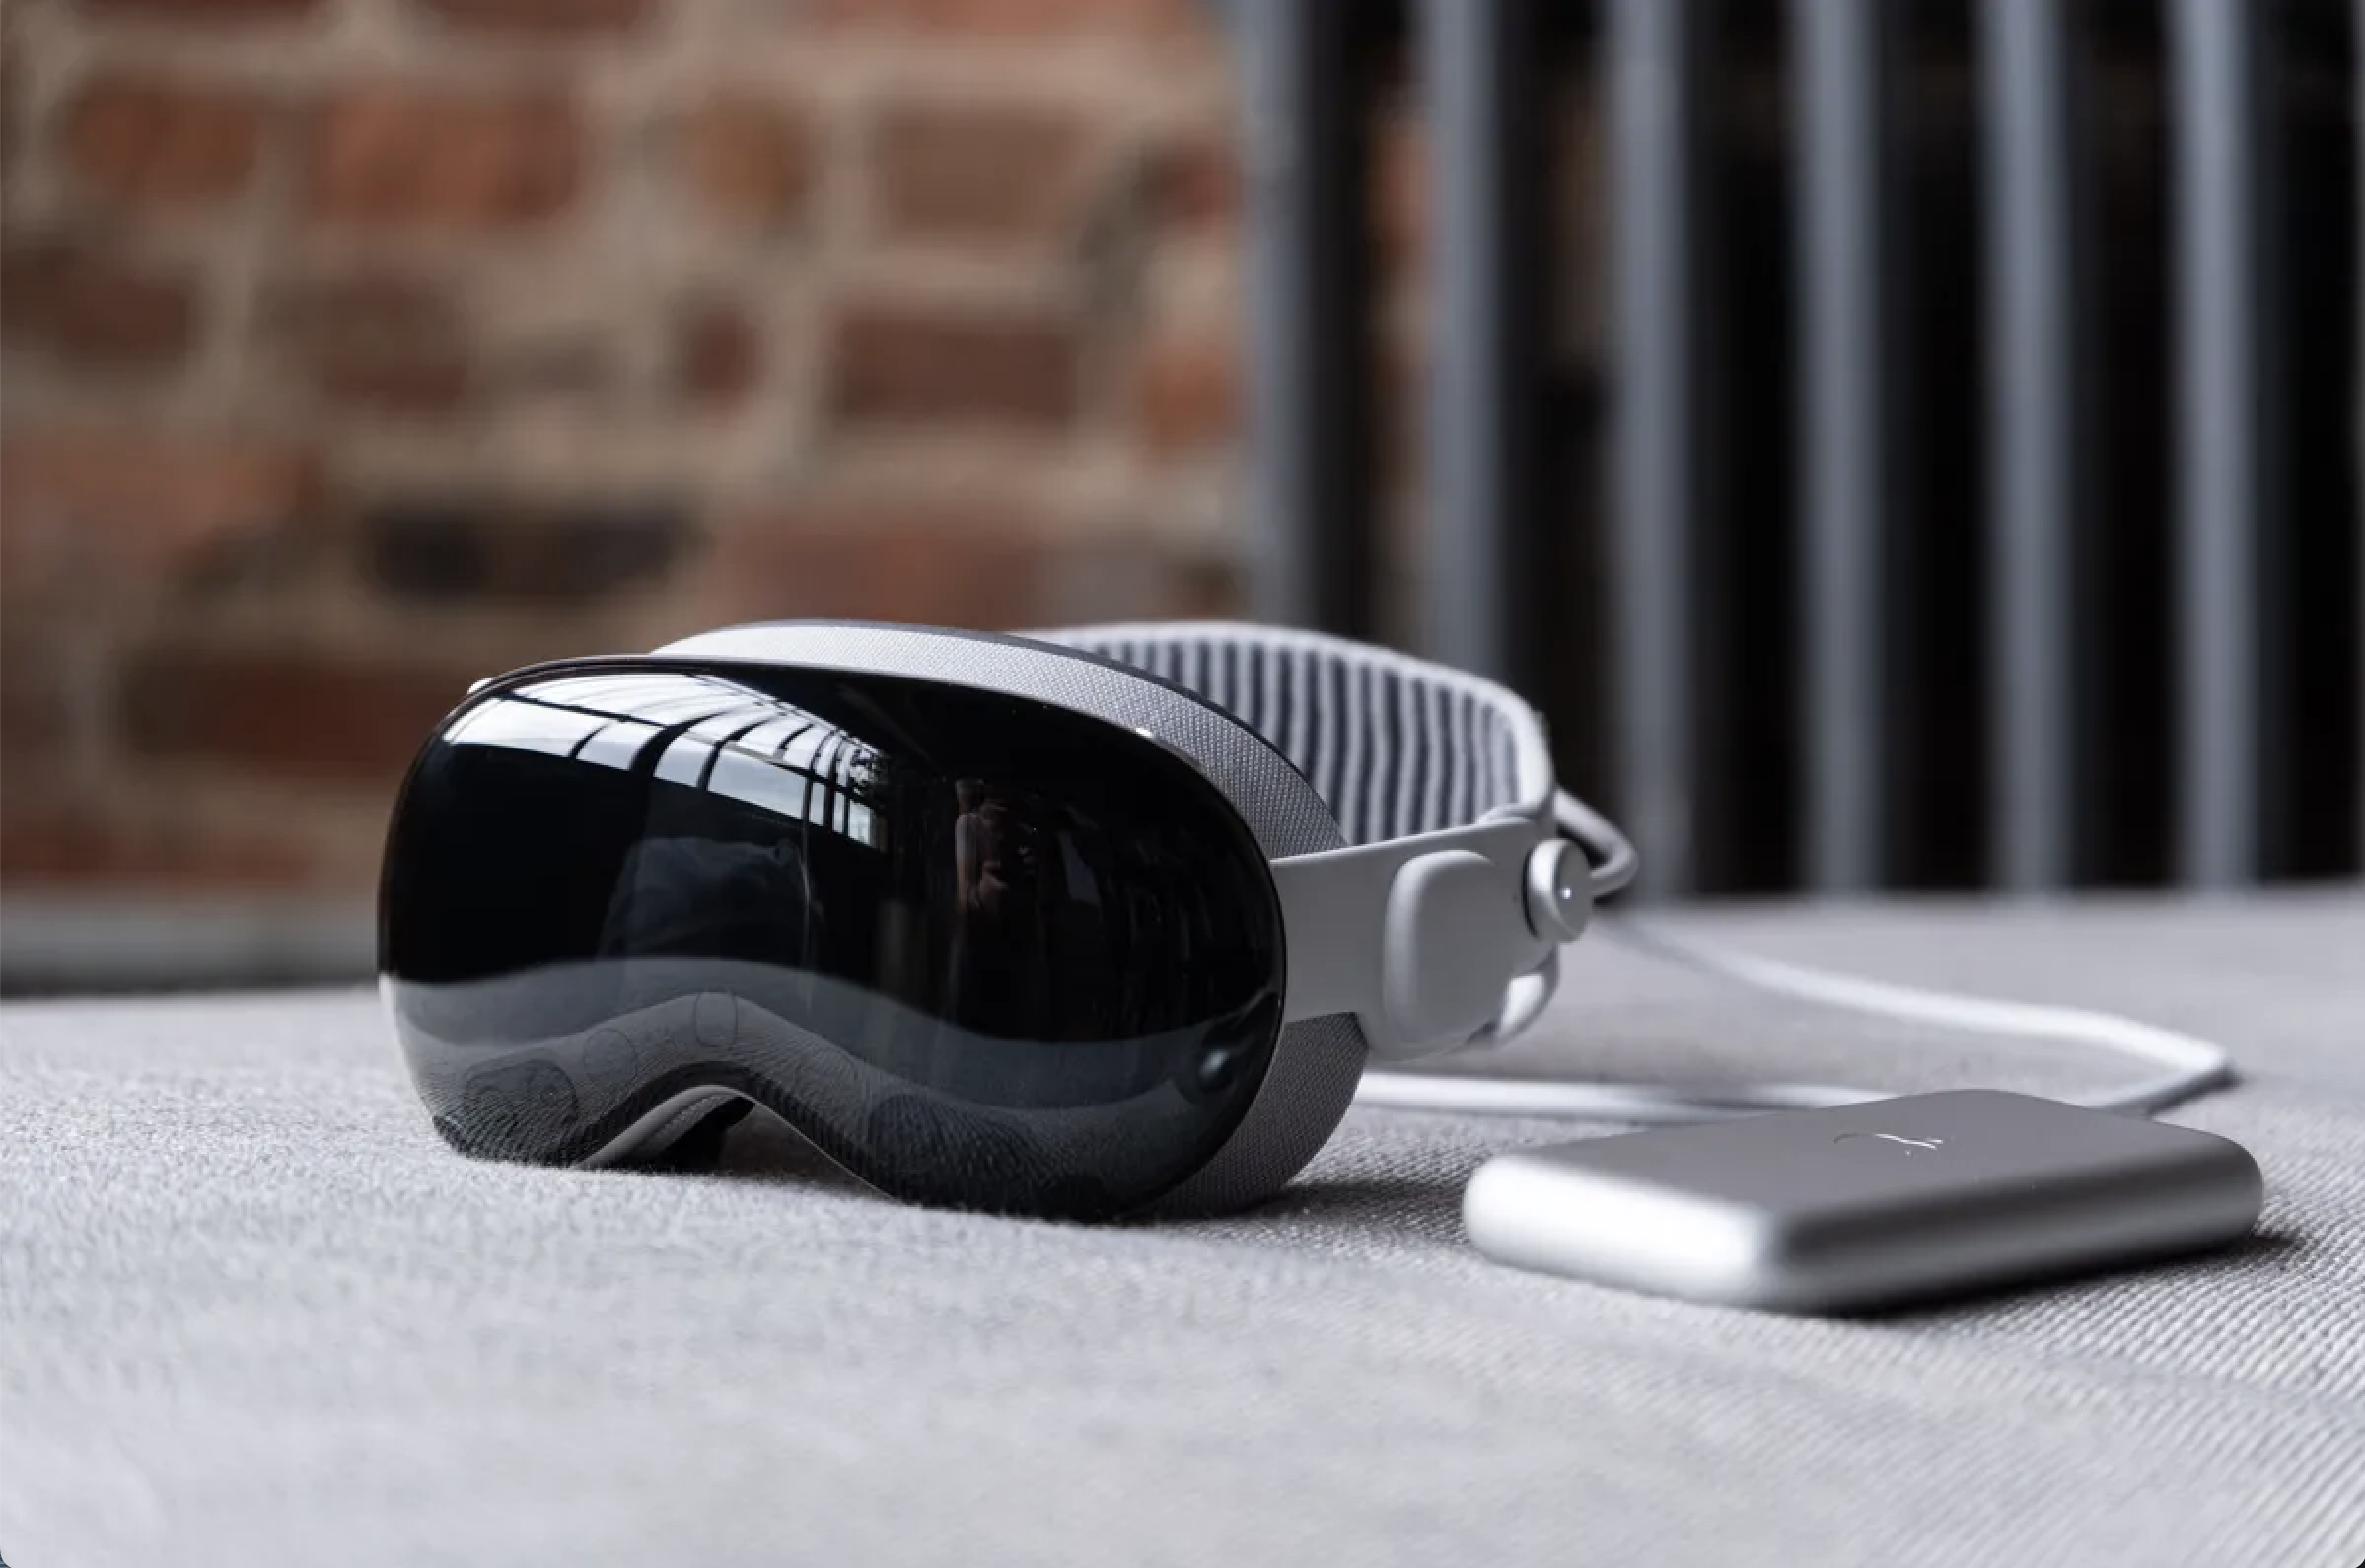 Apple fans are starting to return their Vision Pros